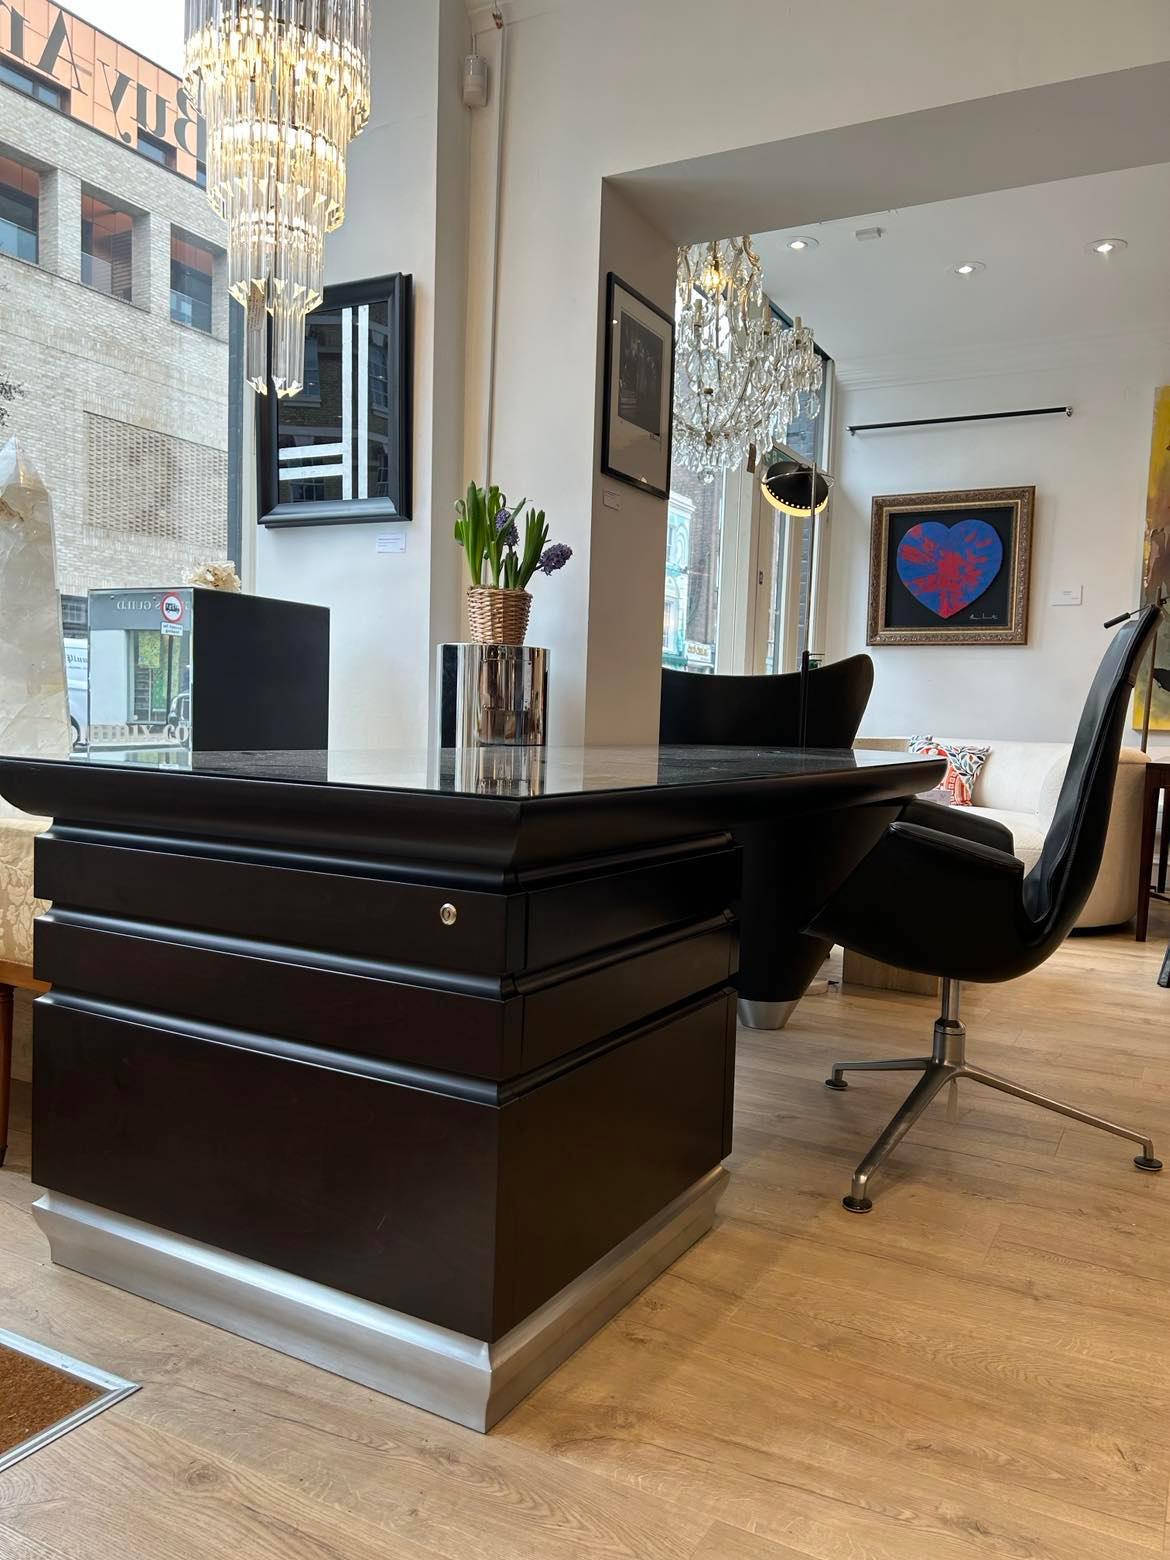 Scriptor Desk By Giorgetti In Macassar Ebony, designed by Leon Krier, 2004. 

This executive desk features ebony wood and a glass top, set on a cone shaped leg and chest with three lockable drawers.

RRP from new £22,000 - In very good pre owned,